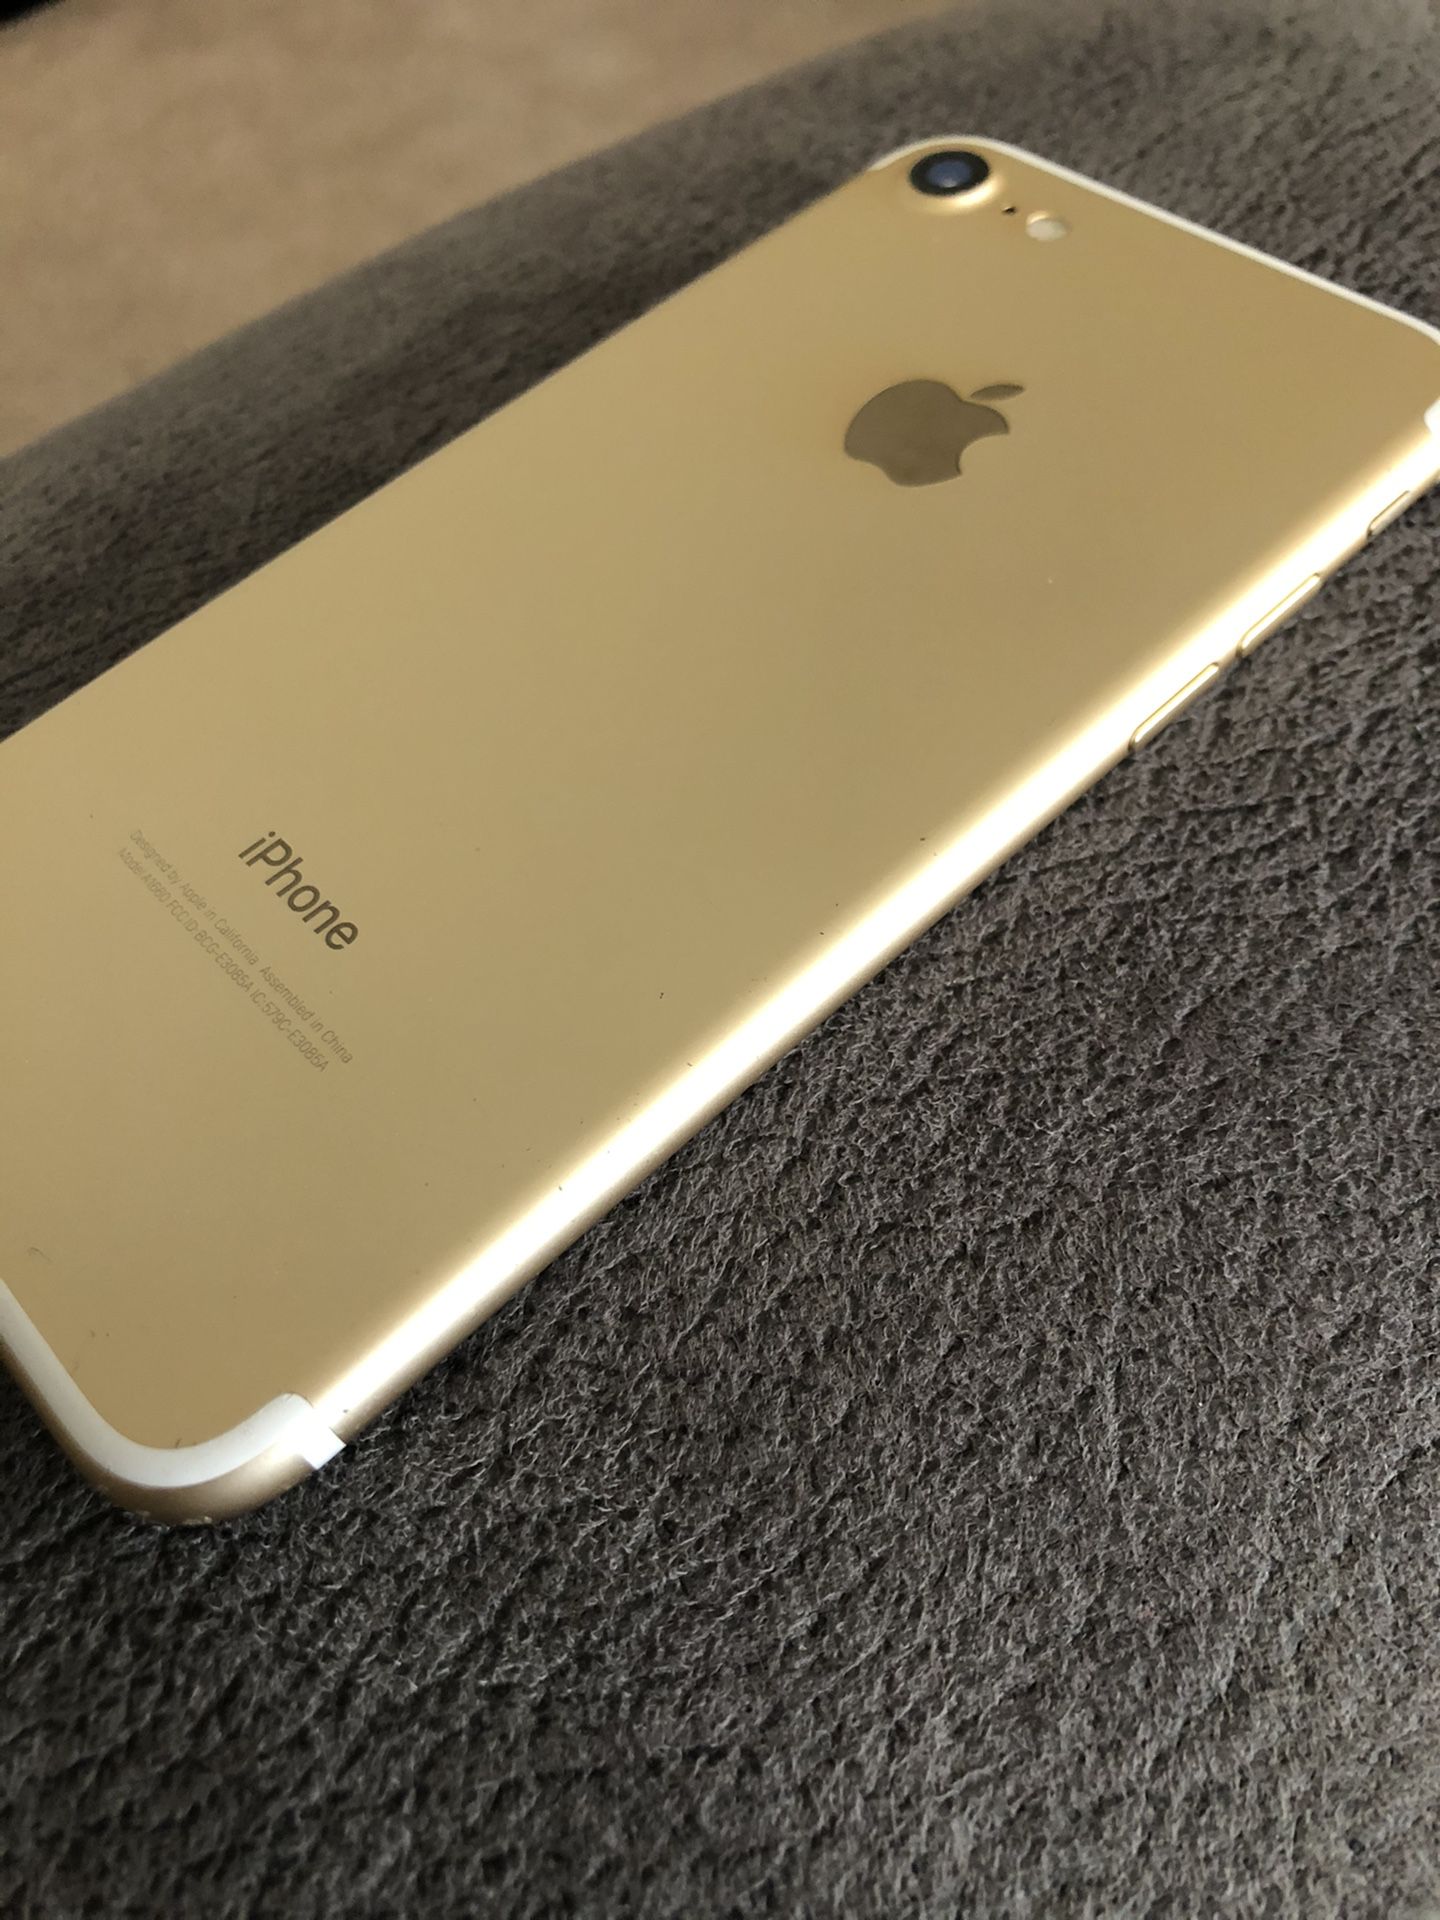 Iphone 7 gold